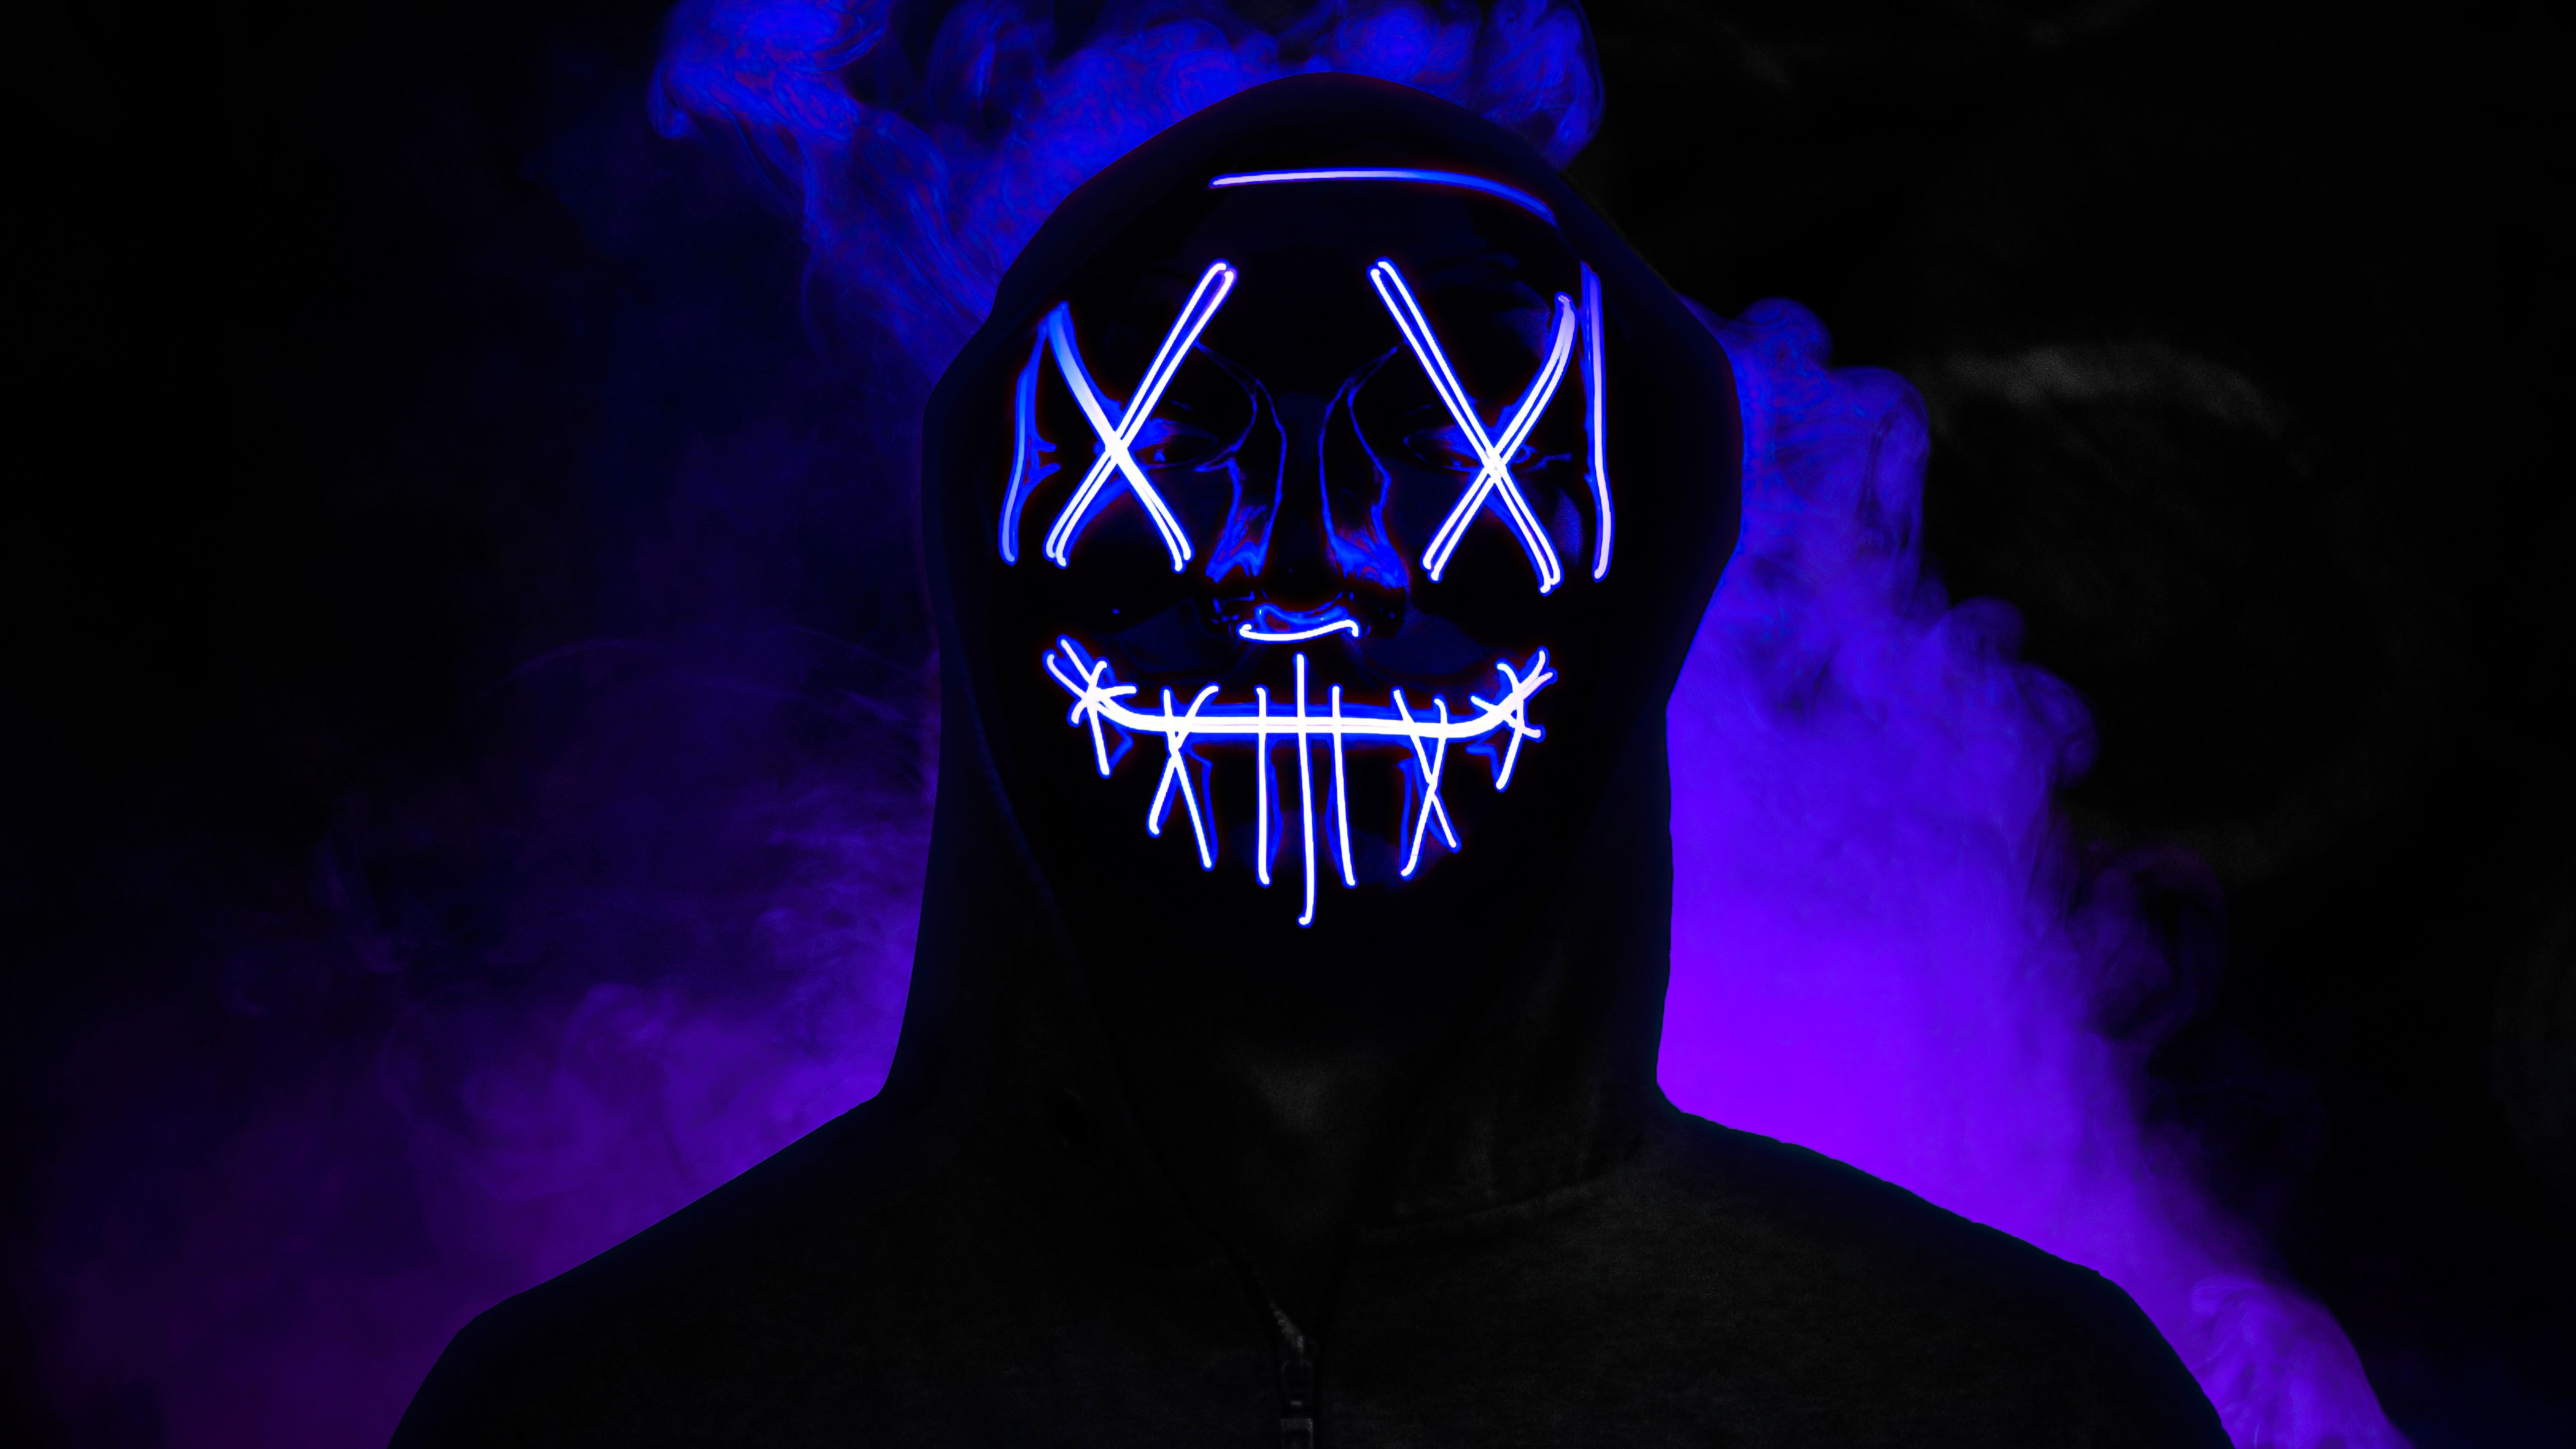 Boy Neon Mask Glowing 5k, HD Artist, 4k Wallpaper, Image, Background, Photo and Picture